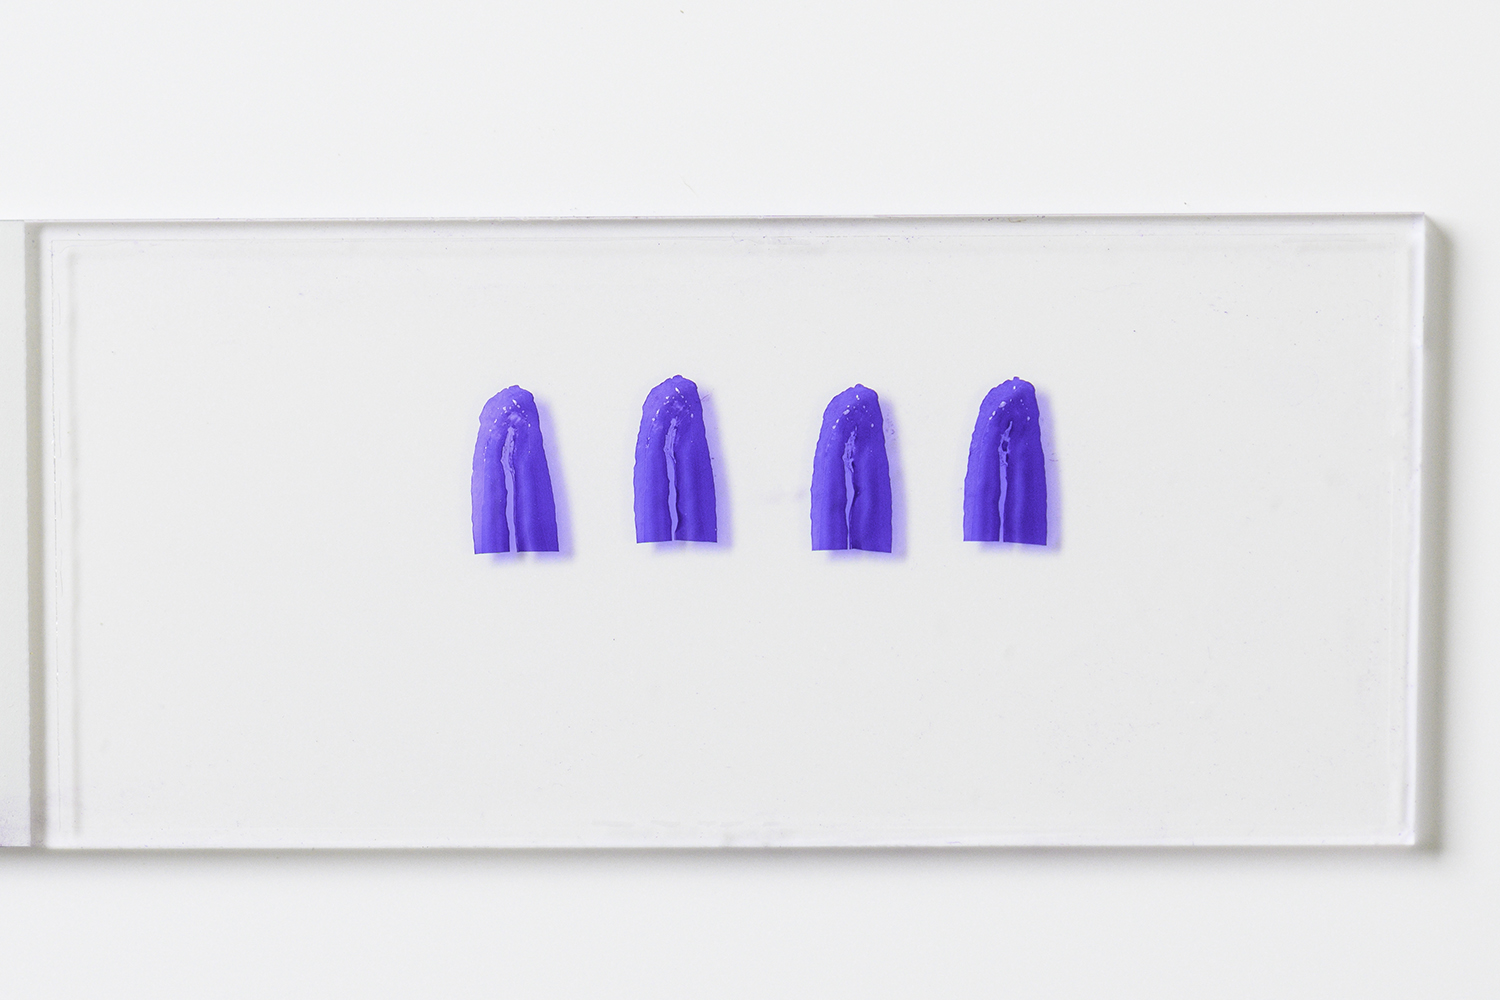 tooth cross sections on a slide appear vivid purple after staining is done